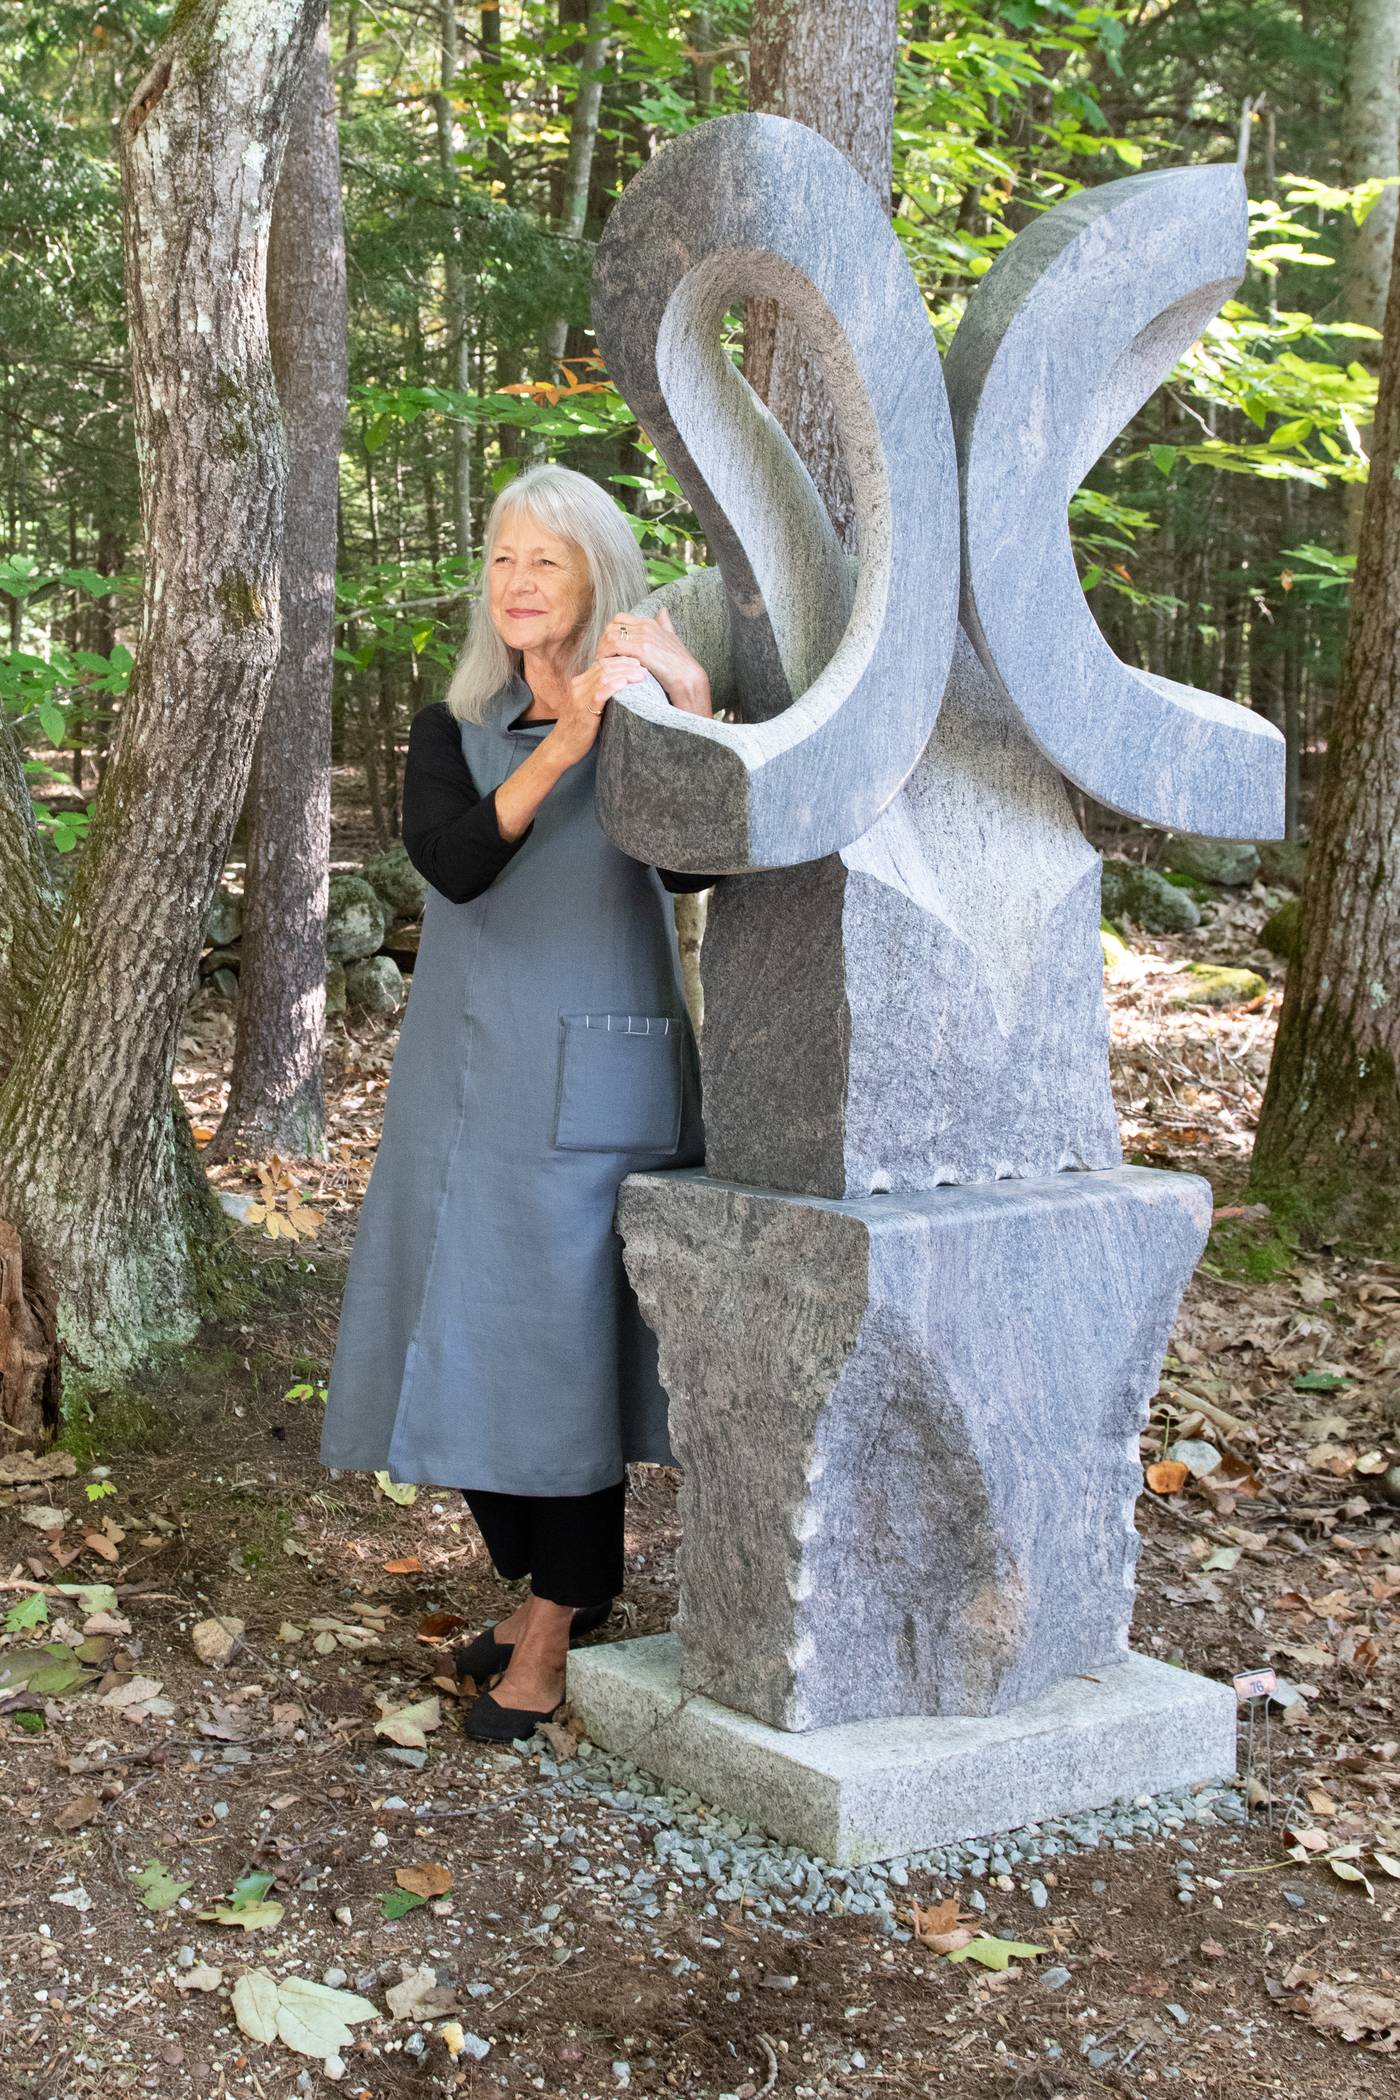 June, in the In Libris tunic, holding onto Miles Chapin’s granite sculpture “Bloom”